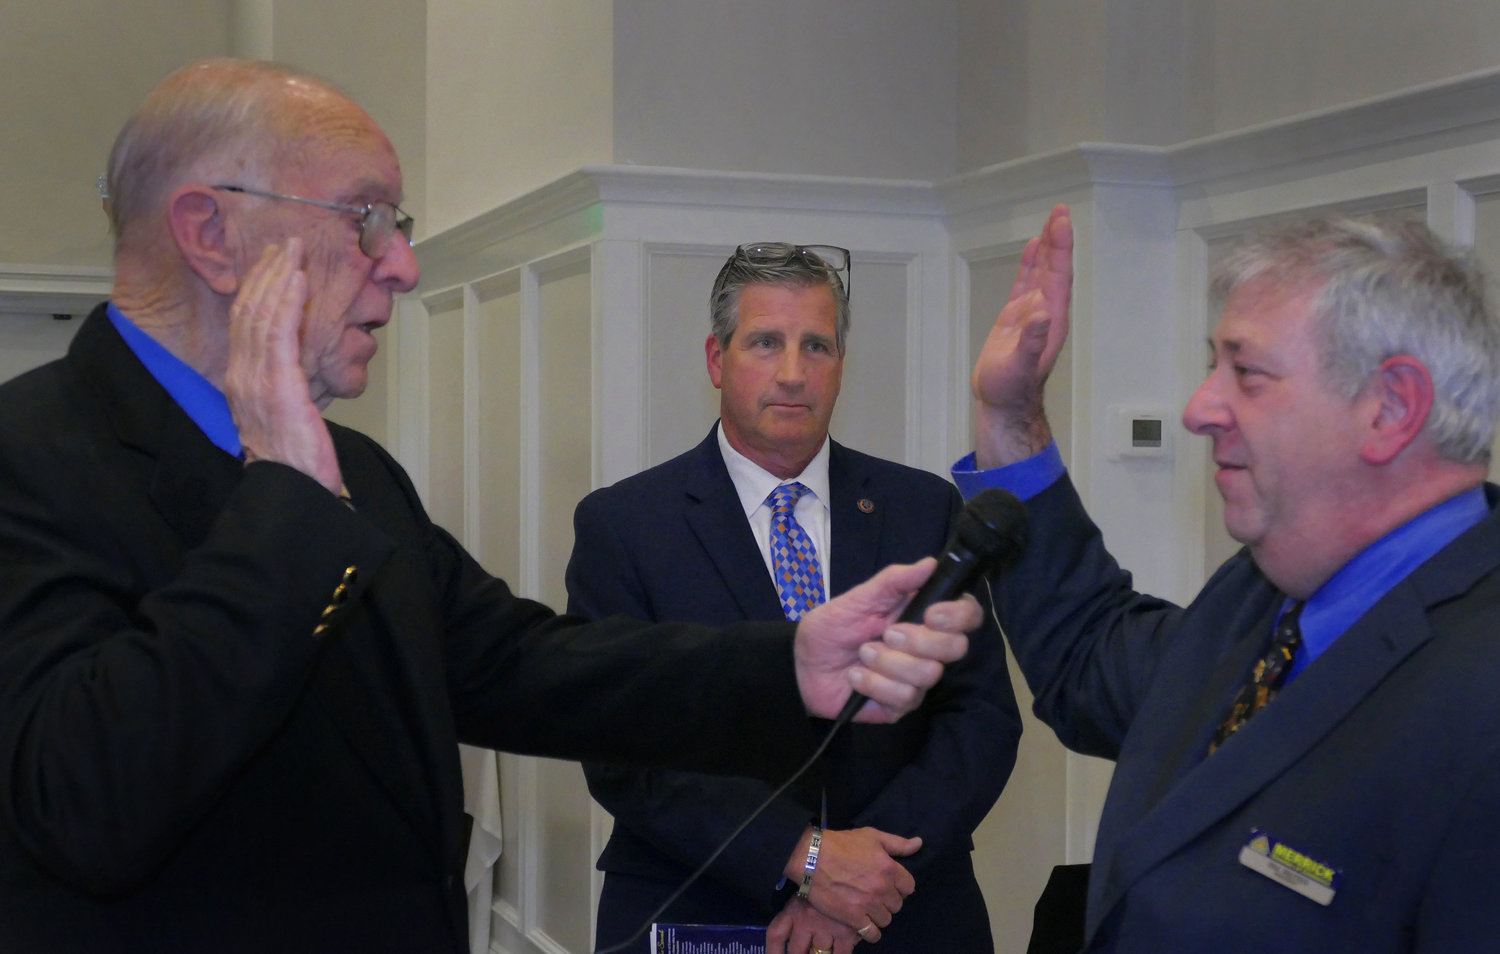 McDonough swore in Reiter for his new term as president.